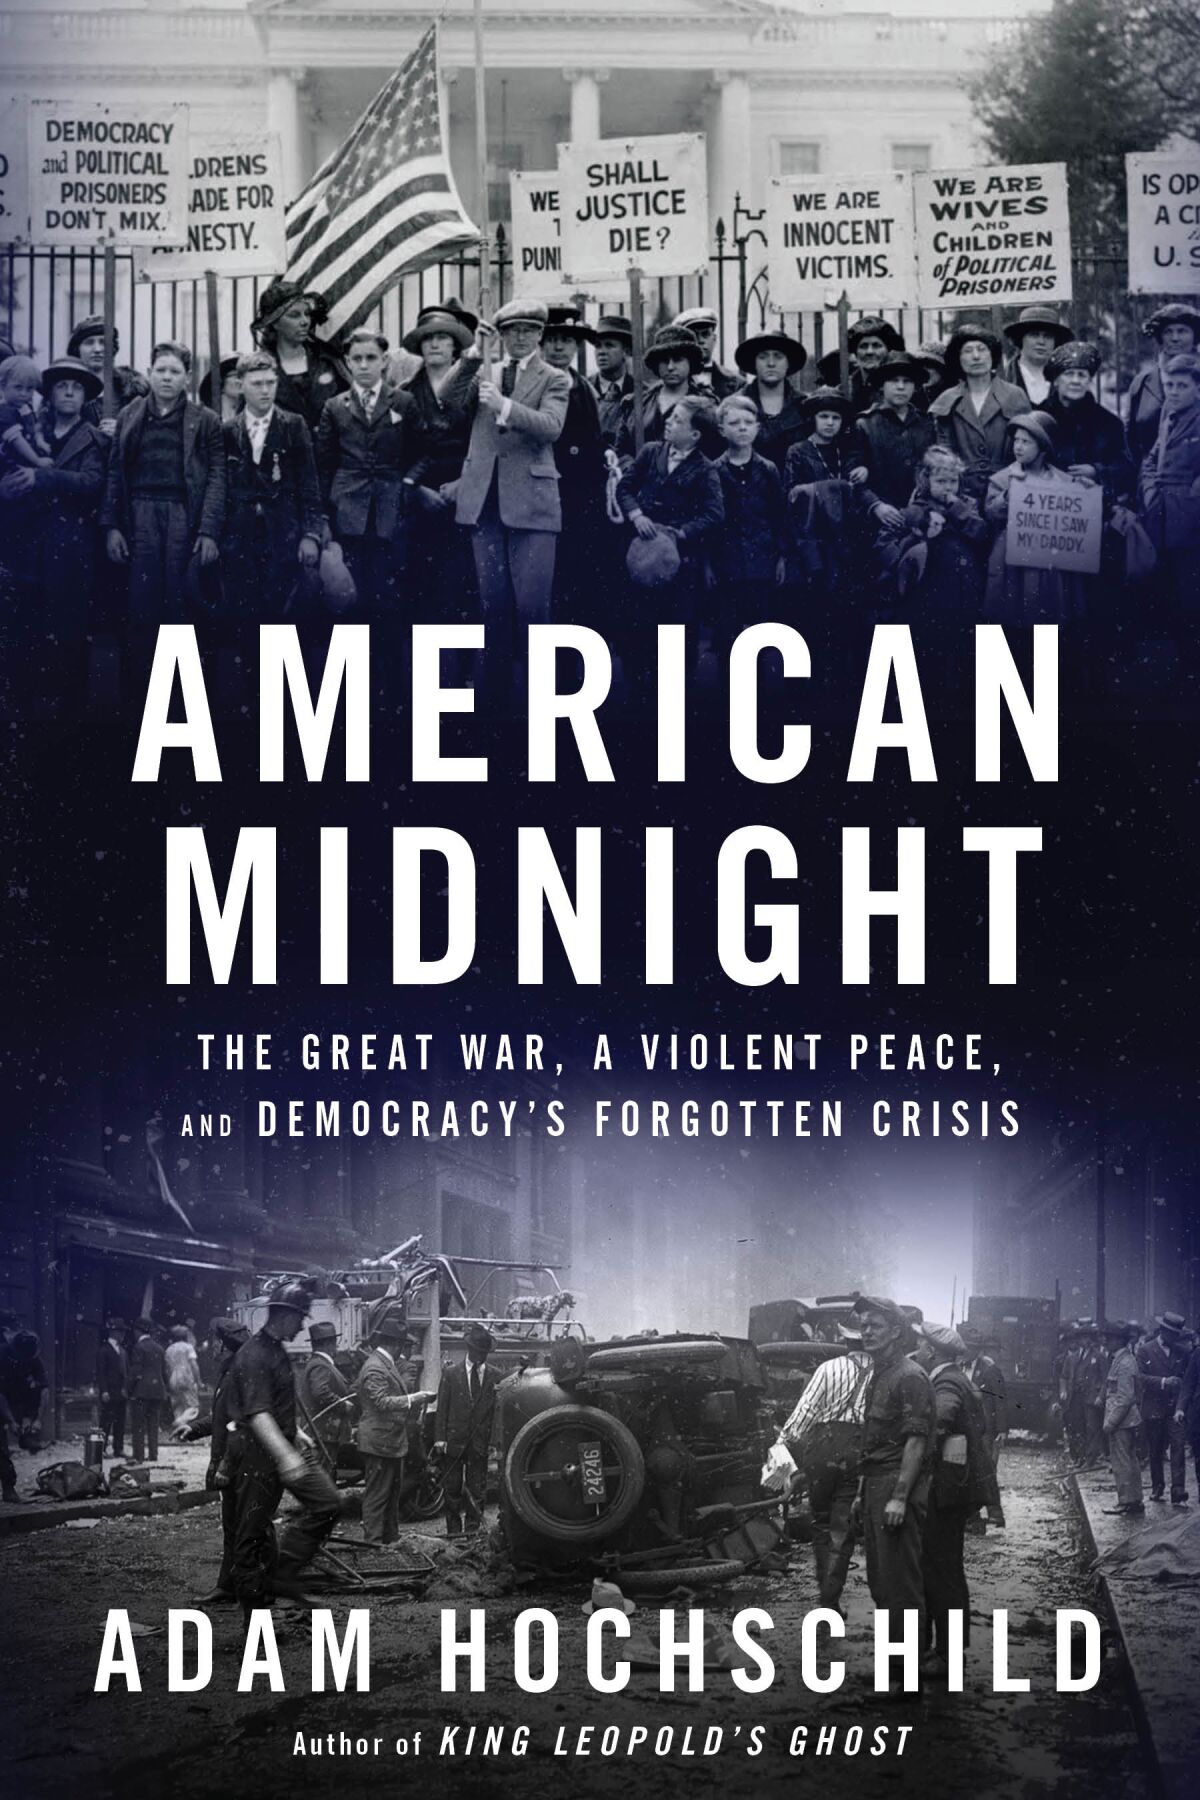 The book cover of "American Midnight"